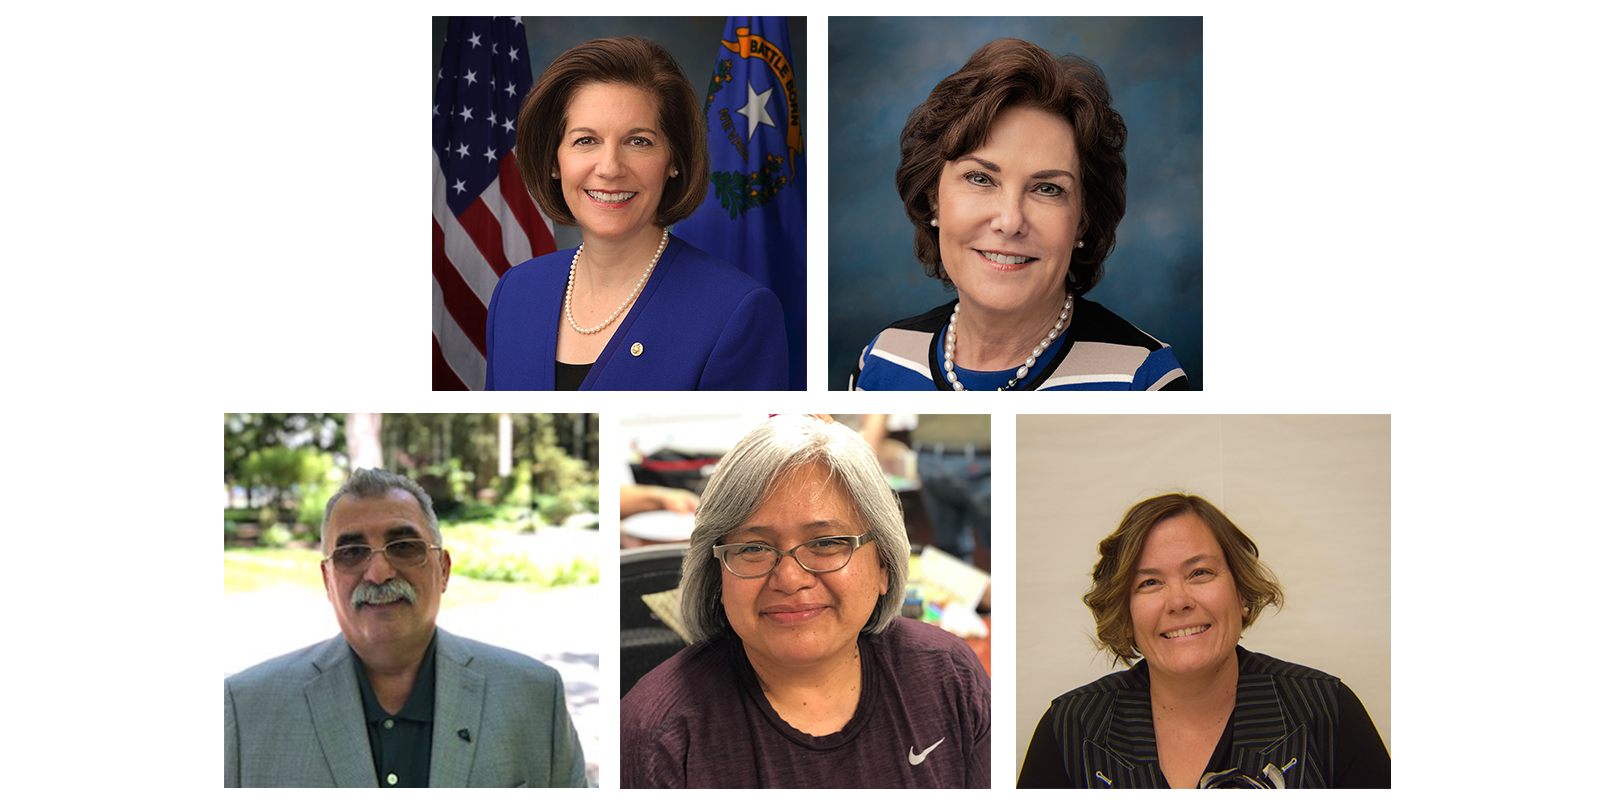 AFSCME Local 4041 members are joined by Nevada Senators Catherine Cortez Masto and Jacky Rosen to urge the Senate to send aid to state and local governments